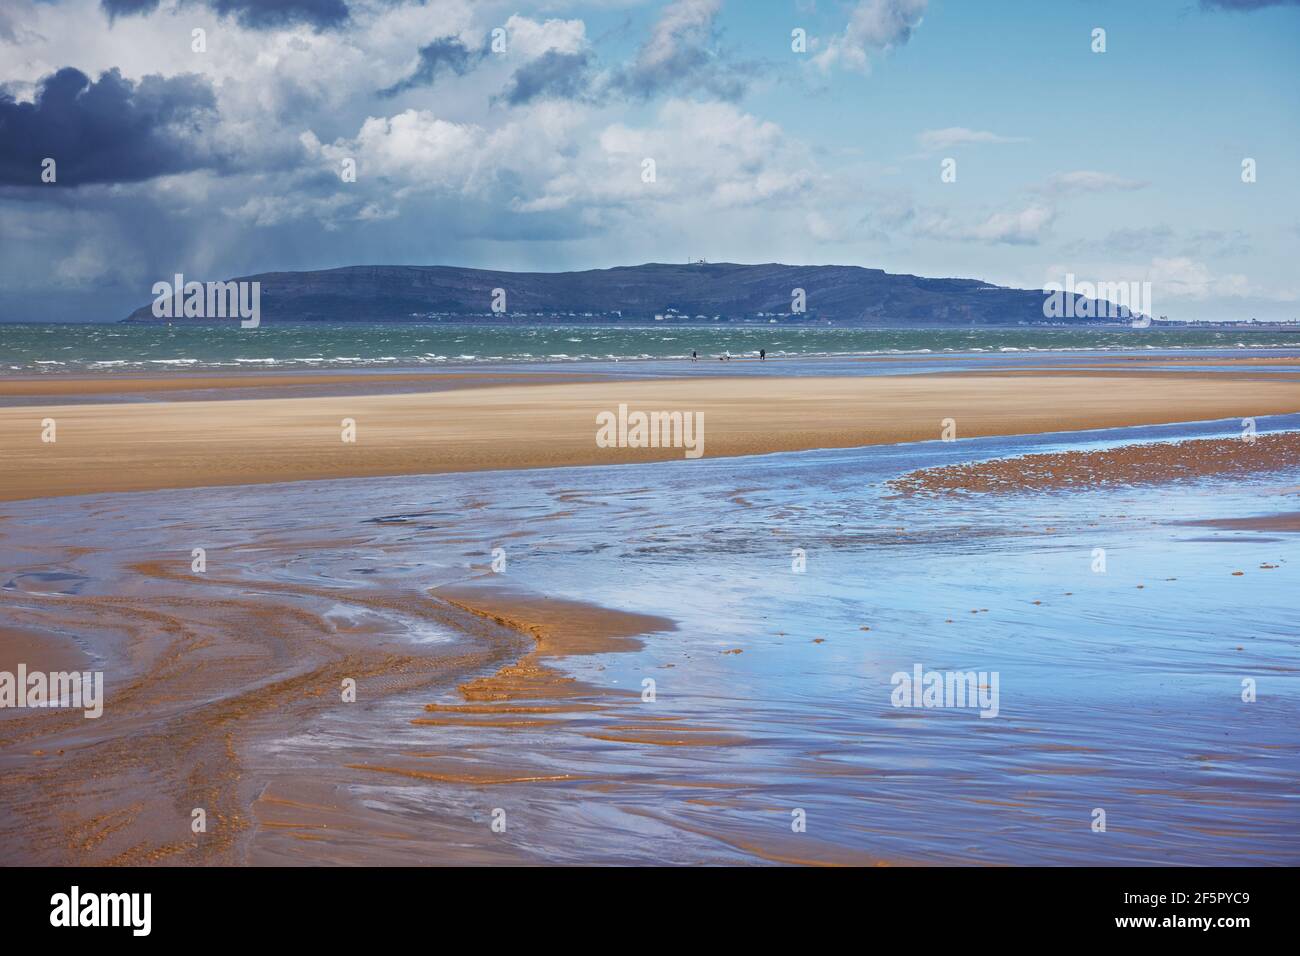 Penmaenmawr Beach, near the town of Penmaenmawr in North Wales, is a long sandy beach adjacent to the Menai Straits. Stock Photo